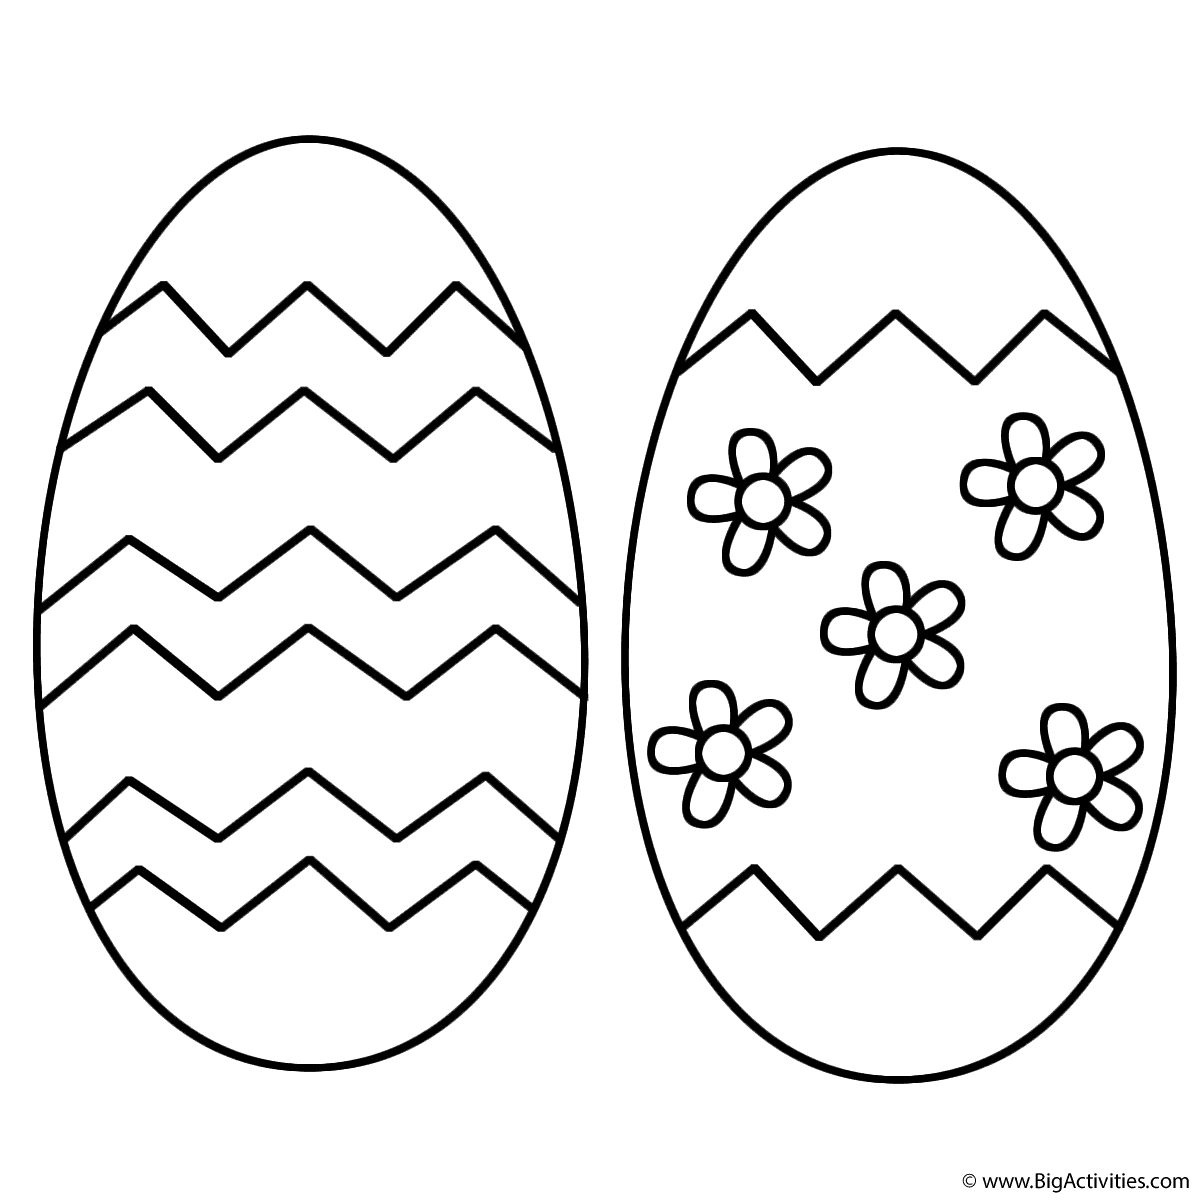 Download Two Easter Eggs with patterns and flowers - Coloring Page ...